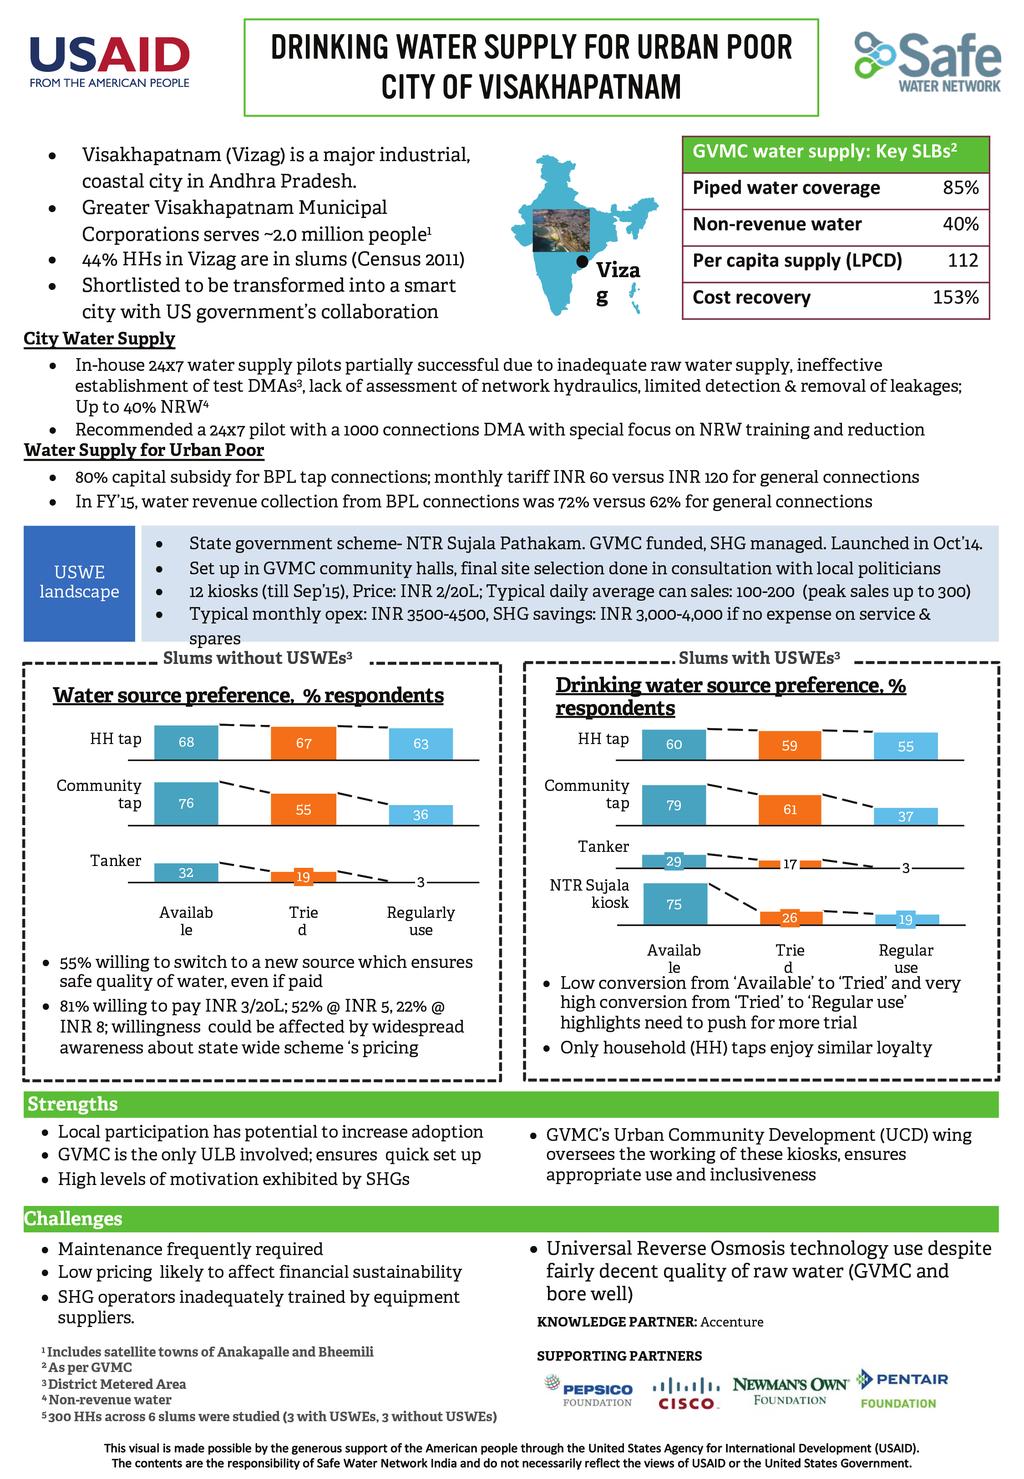 5 Snapshot of Research Results: New Delhi 7.